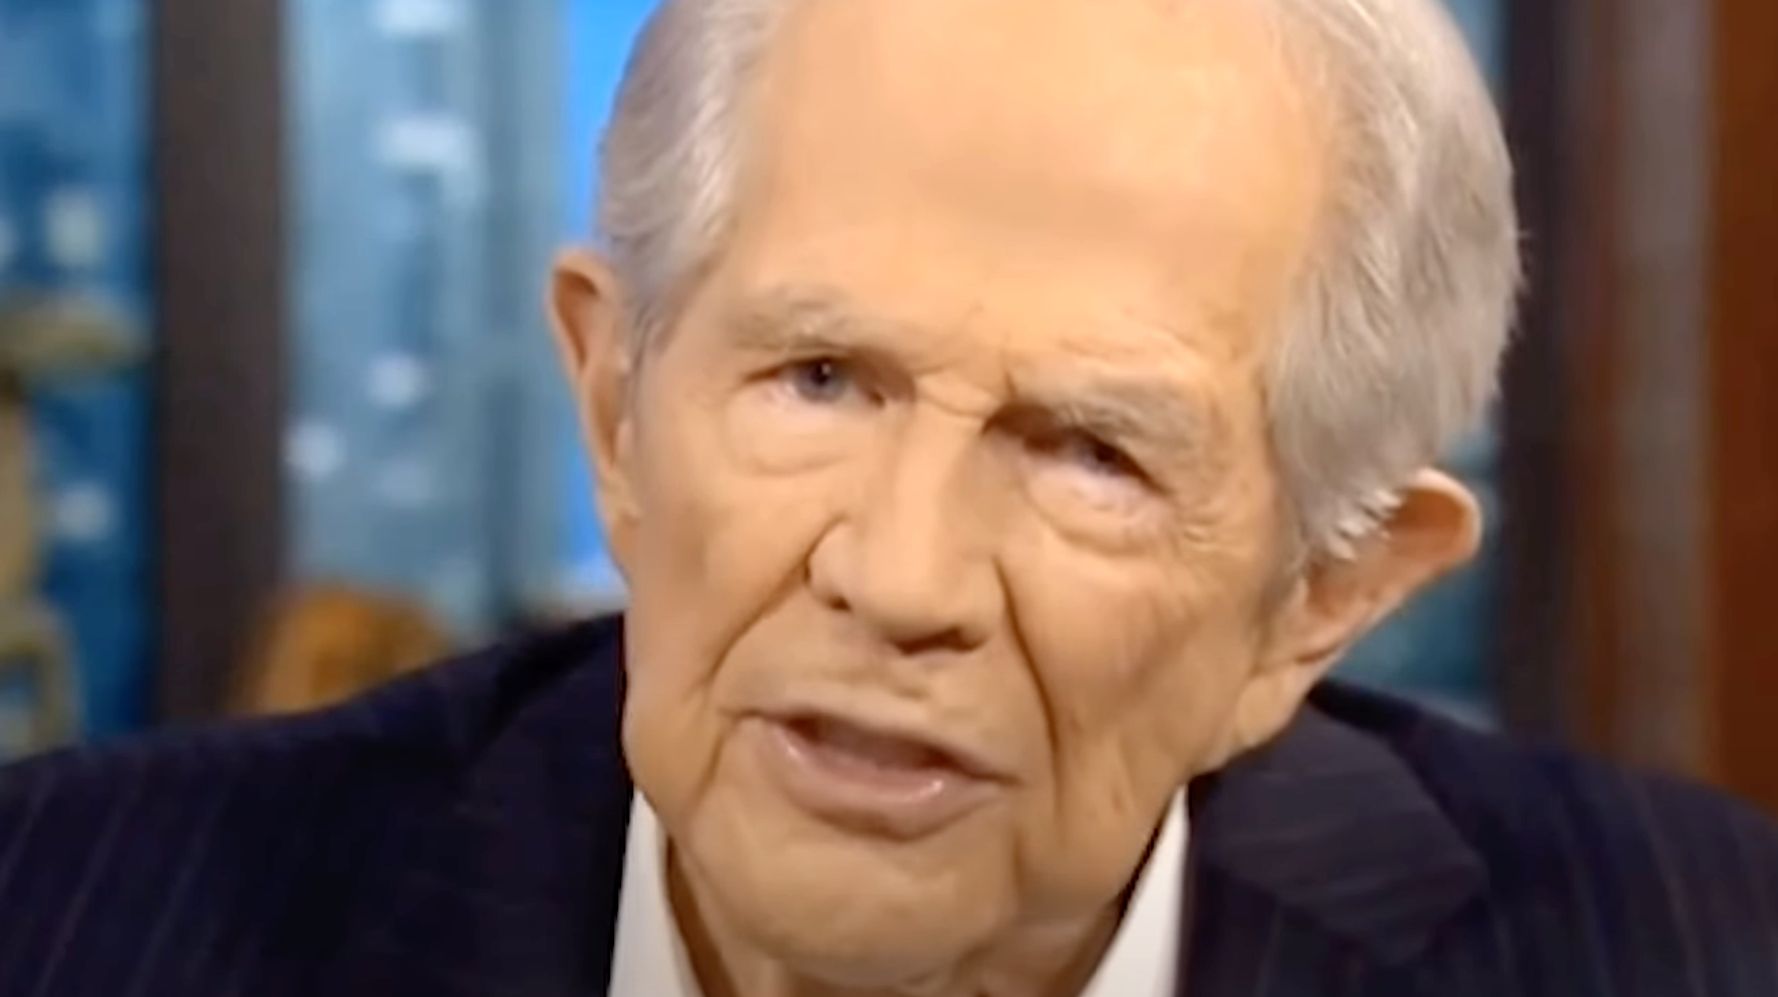 Pat Robertson’s ‘700 Club’ Departure Marked With Montage Of His Most Repulsive Comments